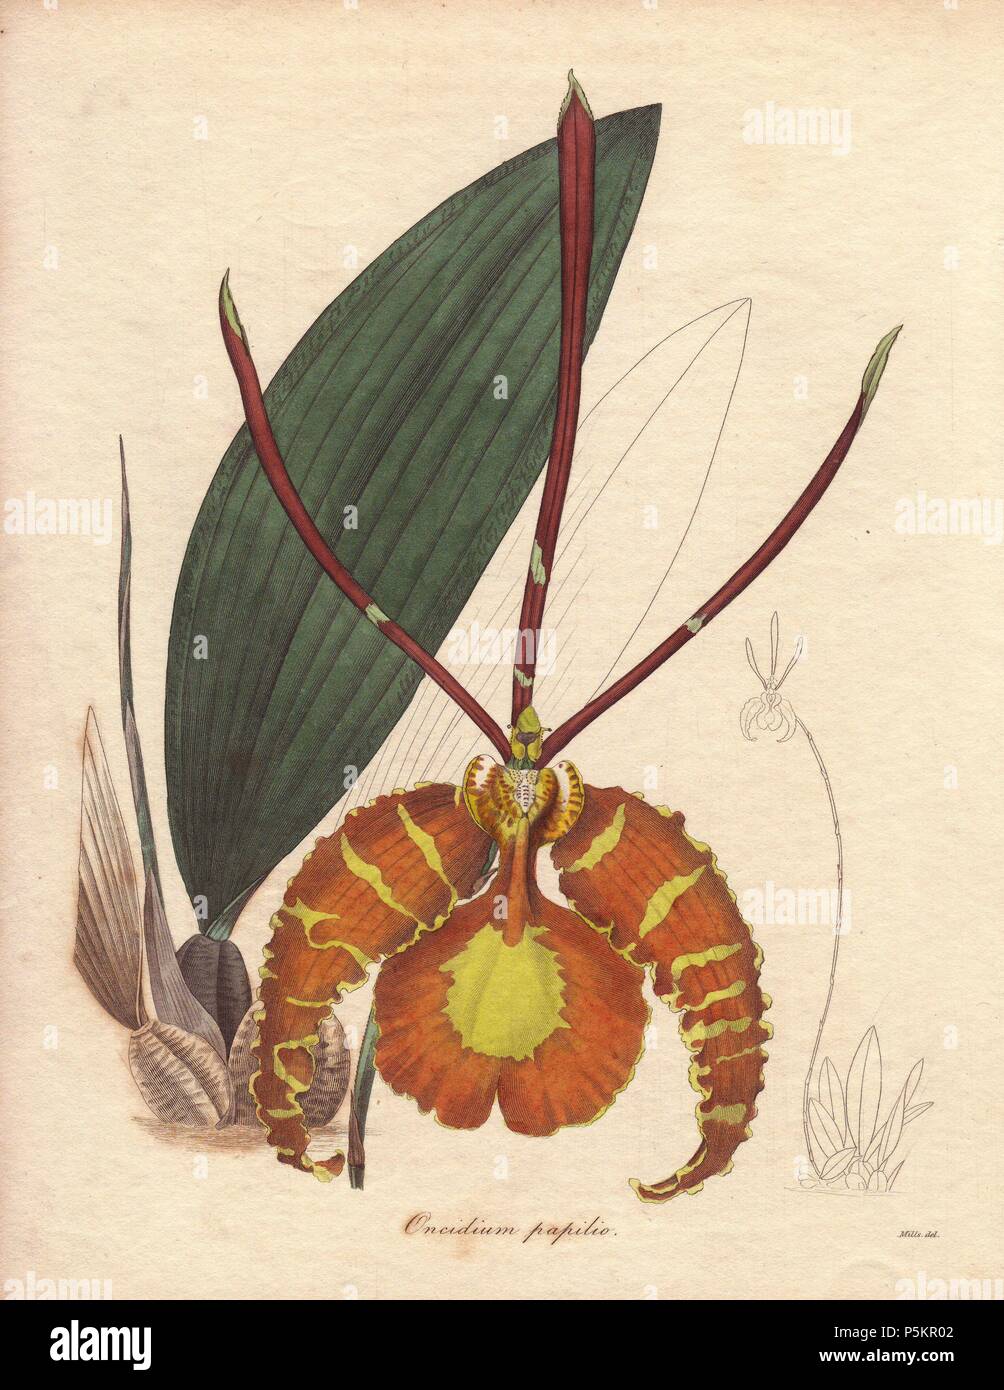 Psychopsis papilio or butterfly orchid is a native of South America and Trinidad with large yellow and reddish-brown flowers. . . Illustration by Miss R. Mills (active 18361842): she was also the main illustrator for Knowles and Westcott’s The Floral Cabinet (1837-1842). . . Benjamin Maund's The Botanist was a five-volume series that introduced 250 new plants from 1836 to 1842. The series is notable for its many female artists: the plates were drawn by Maund's daughters Sarah and Eliza, Augusta Withers, Priscilla Bury, Jane Taylor, Miss R. Mills among others. The other characteristic is parti Stock Photo